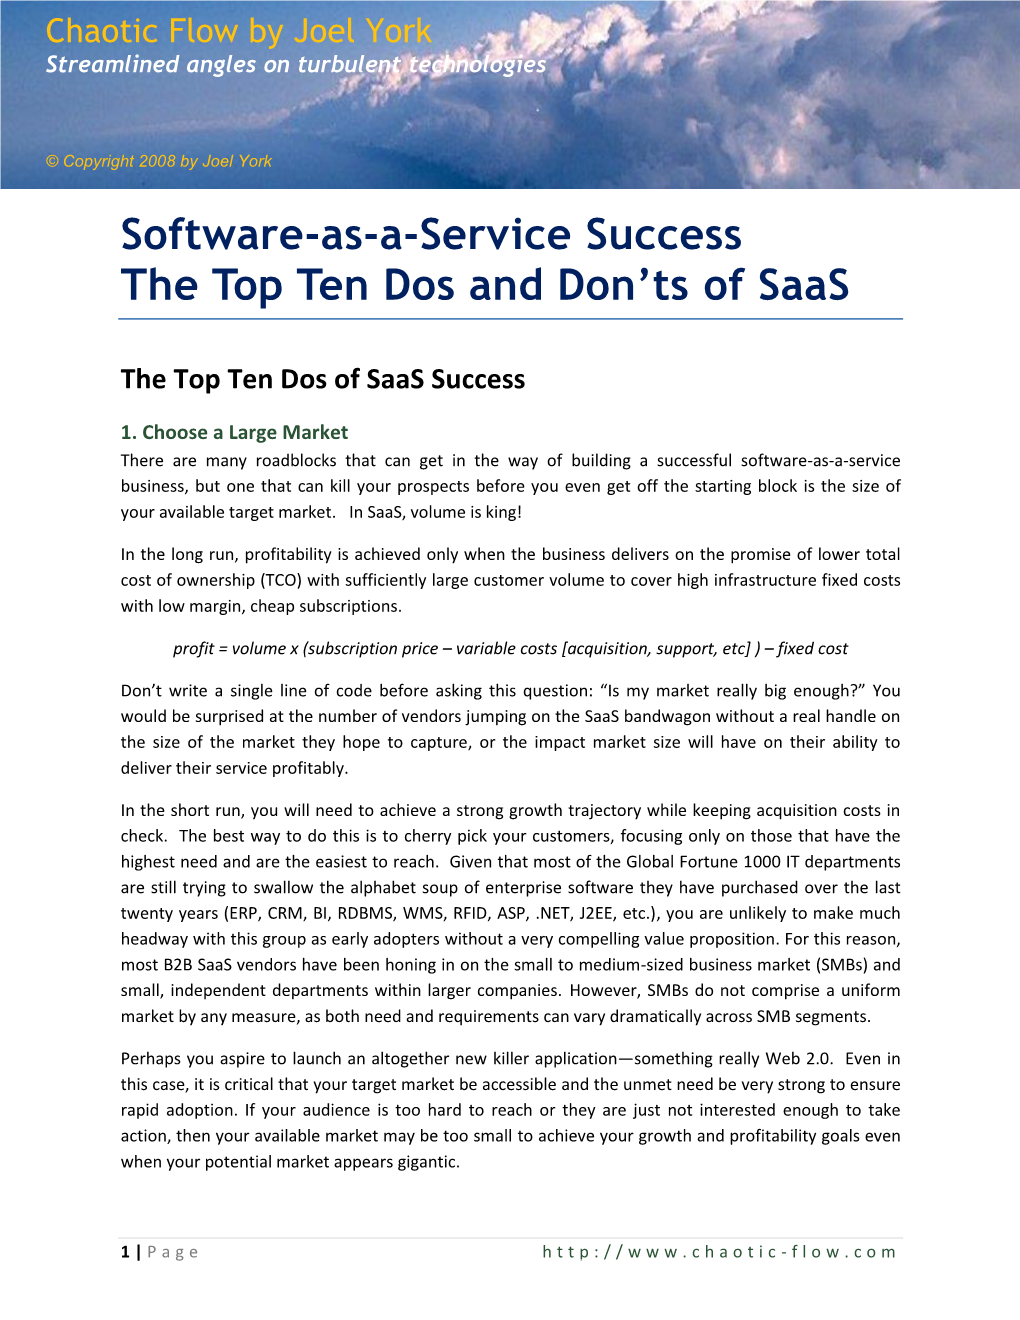 Software-As-A-Service Success the Top Ten Dos and Don'ts of Saas